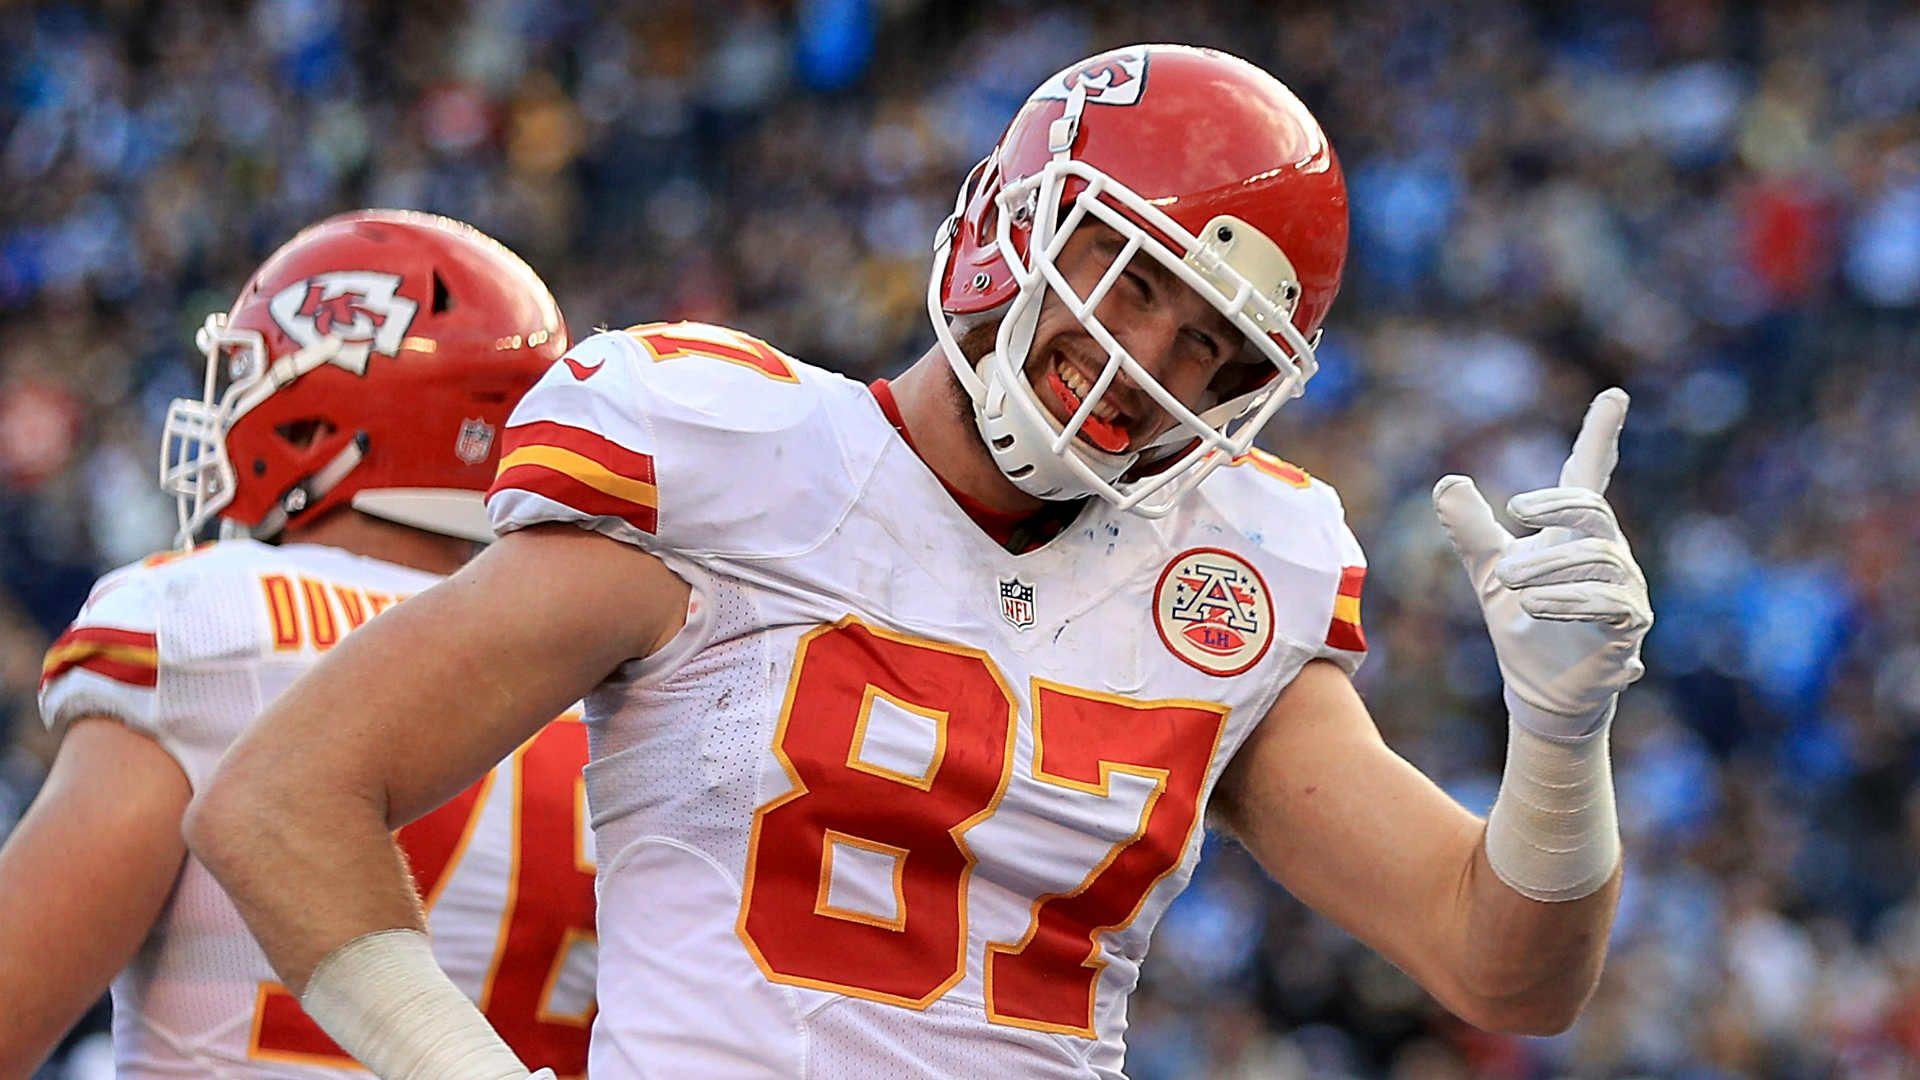 Chiefs' Travis Kelce arrives for playoff game using shoe as phone.